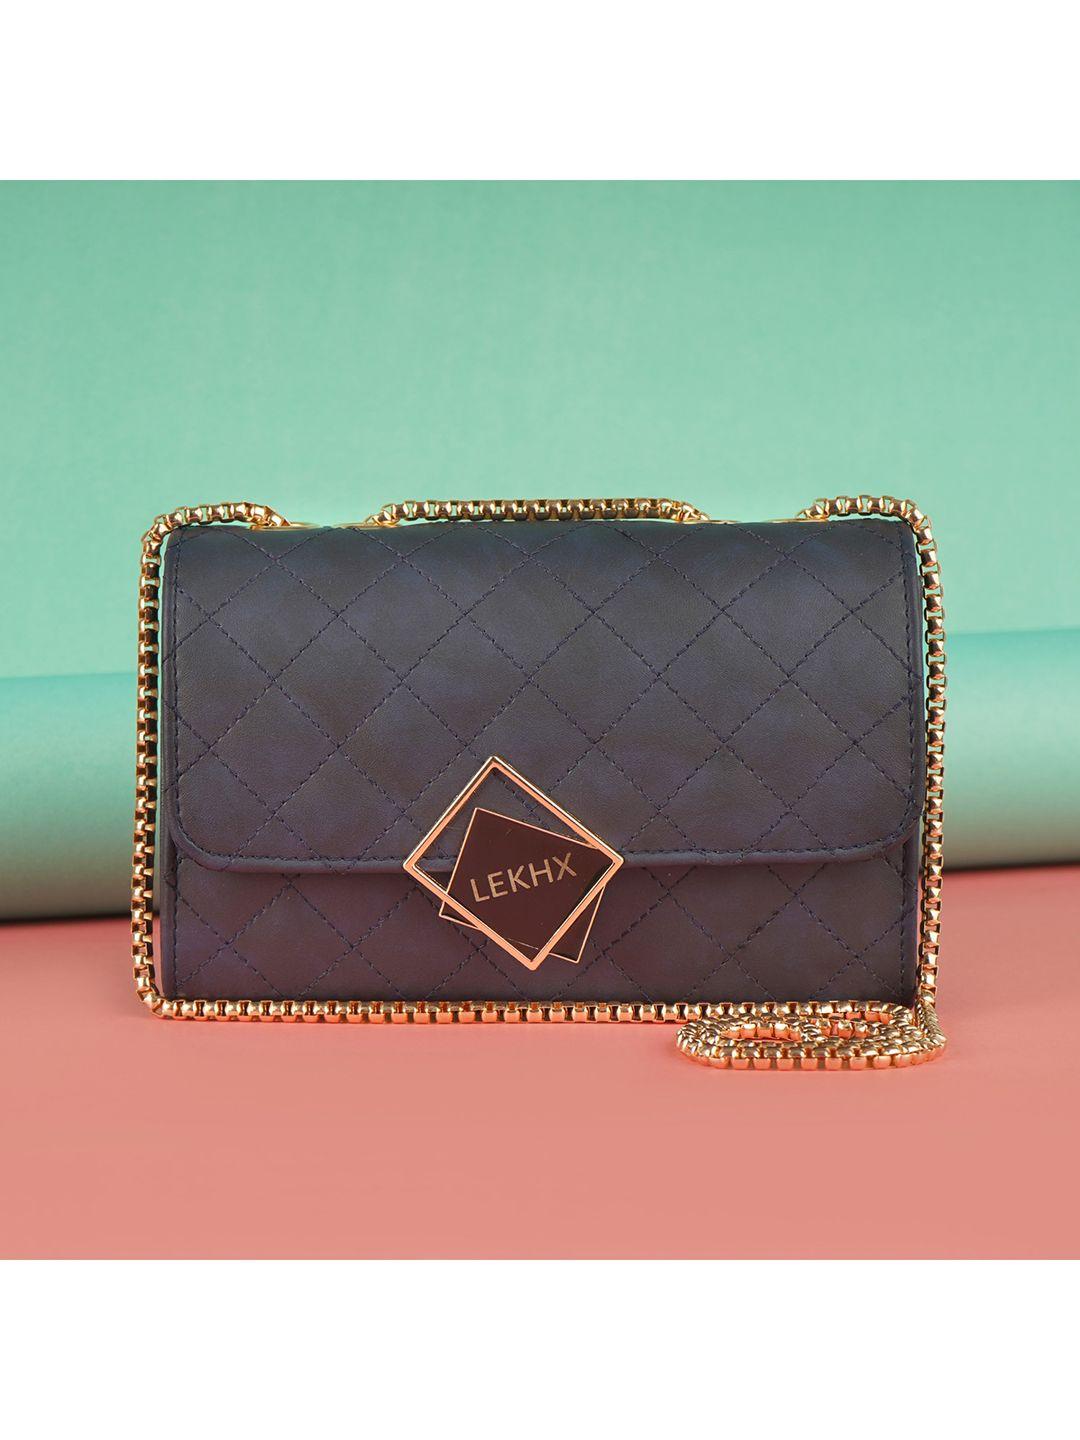 lekhx blue textured pu structured sling bag with quilted